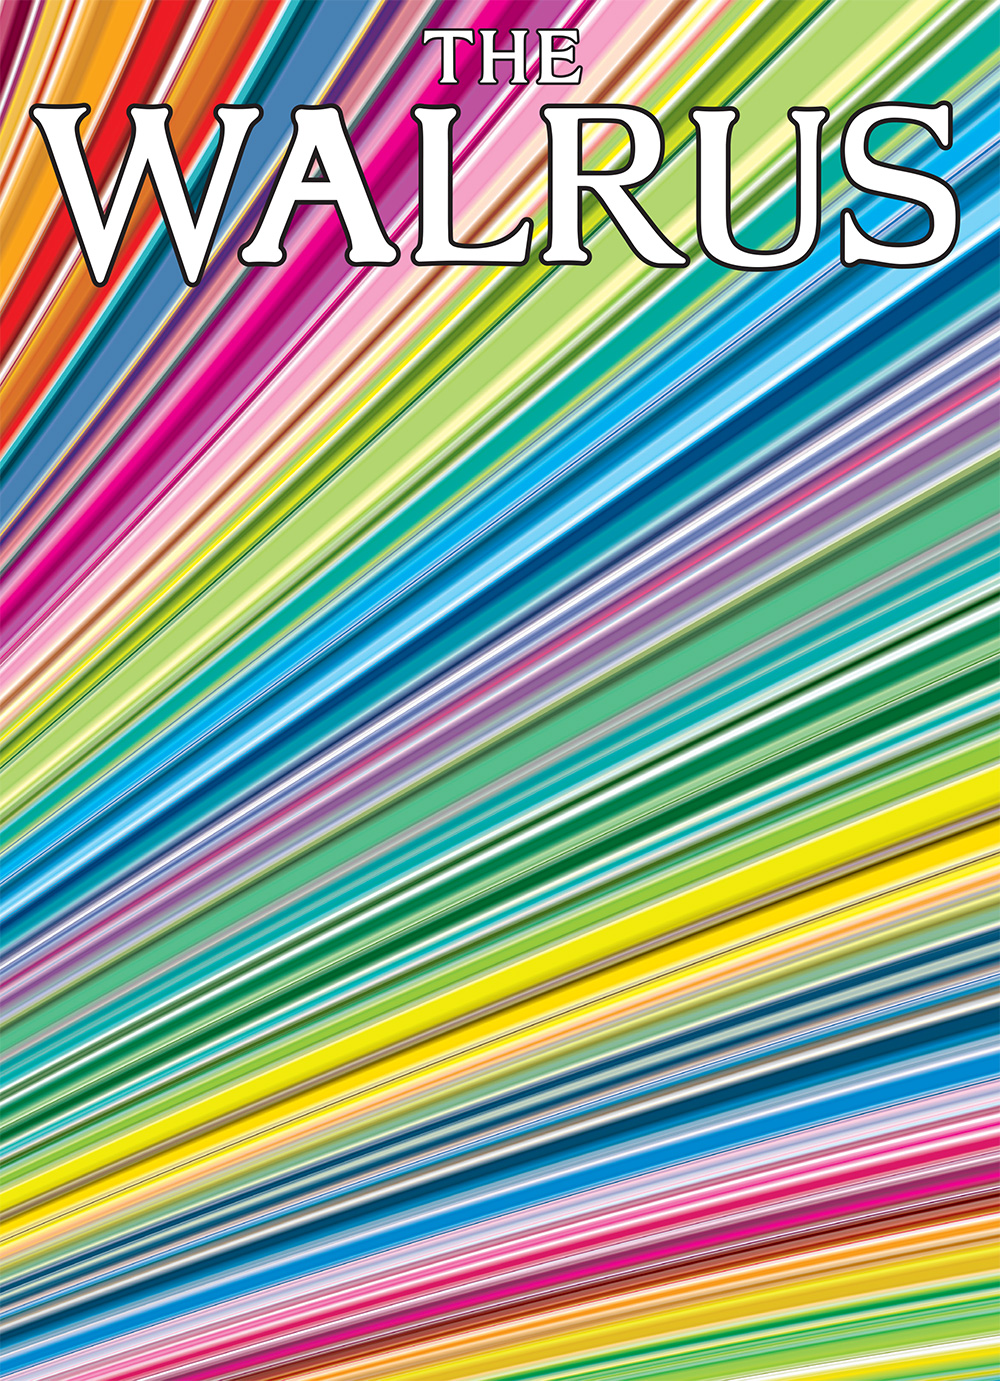 Cover of The Walrus magazine featuring bright, multicoloured stripes positioned diagonally across the frame. The Walrus wordmark is in white at the top.